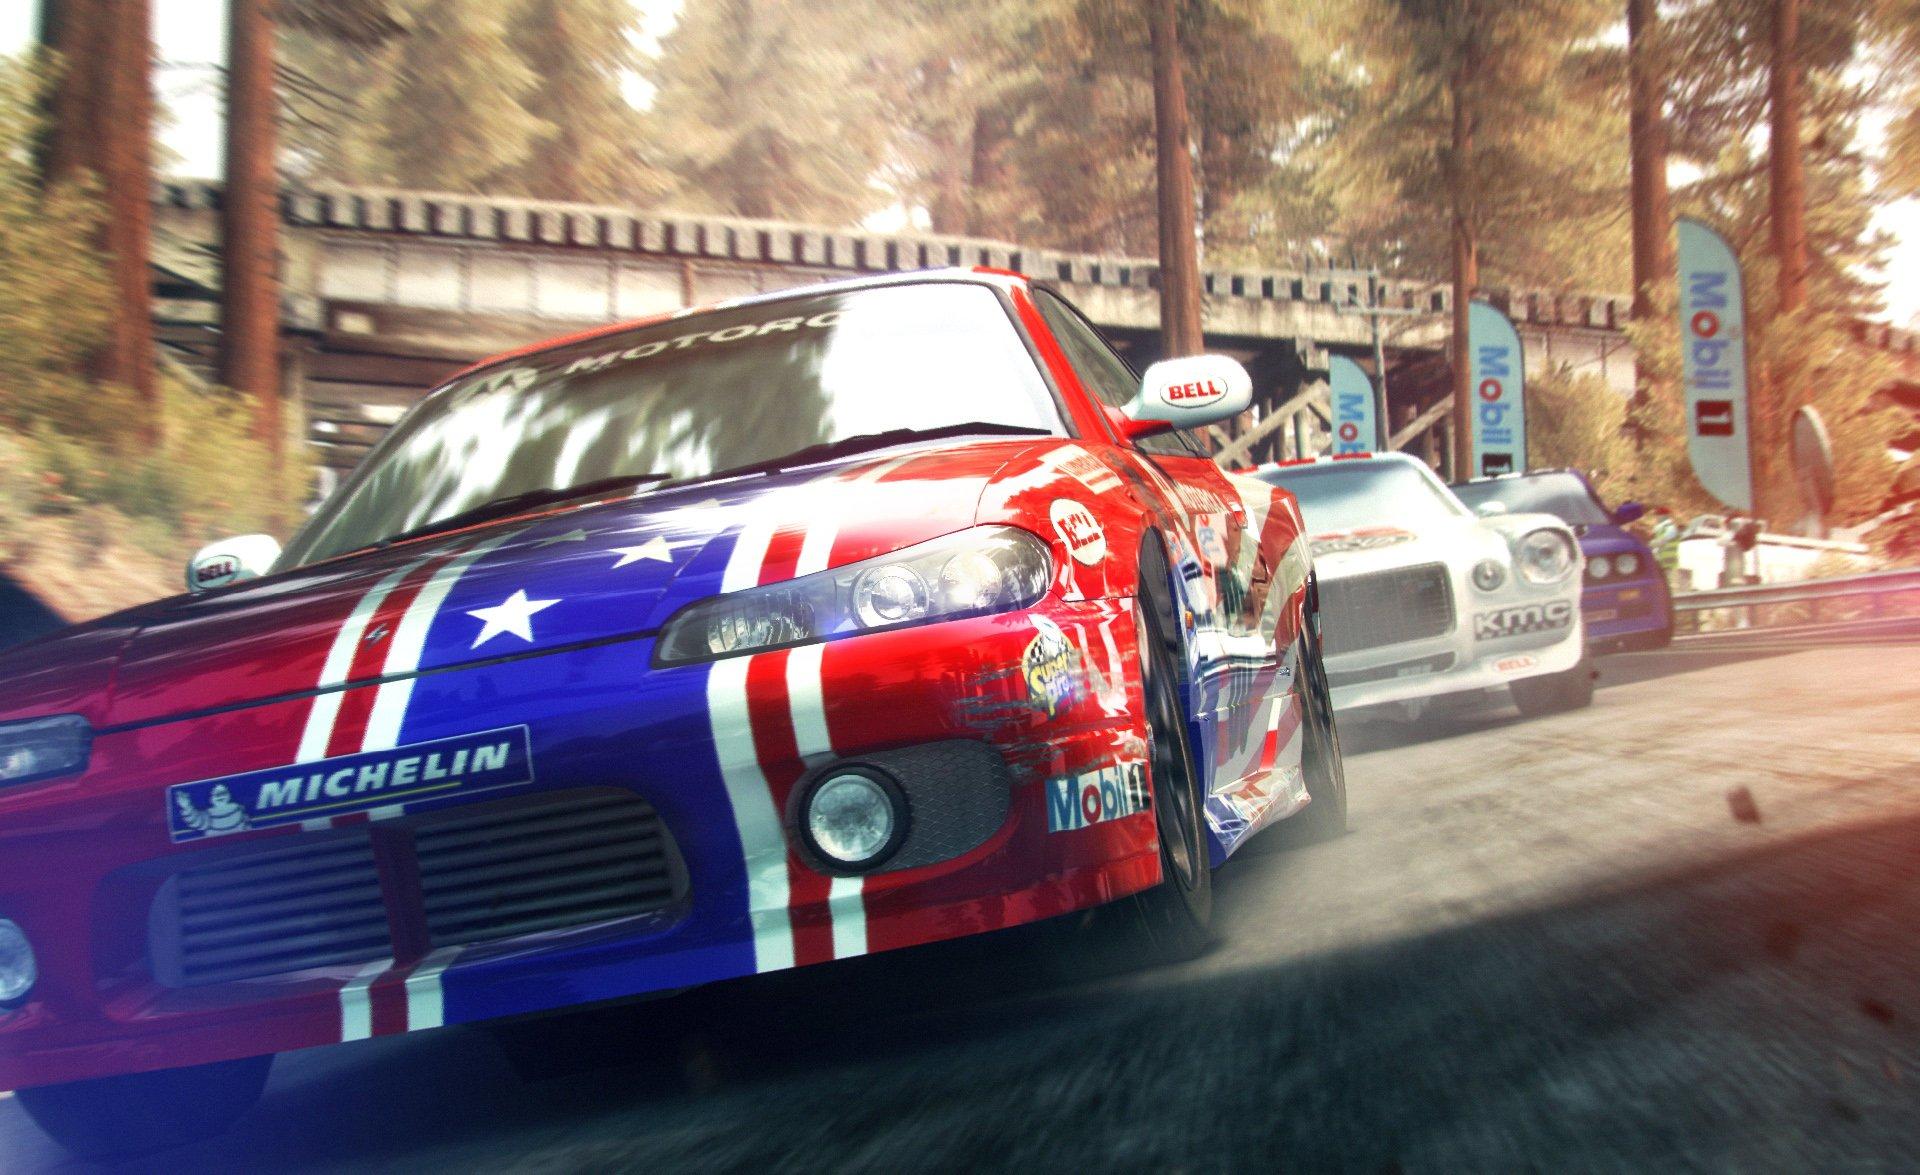 Grid 2 video game review: dual-style race - Newsday